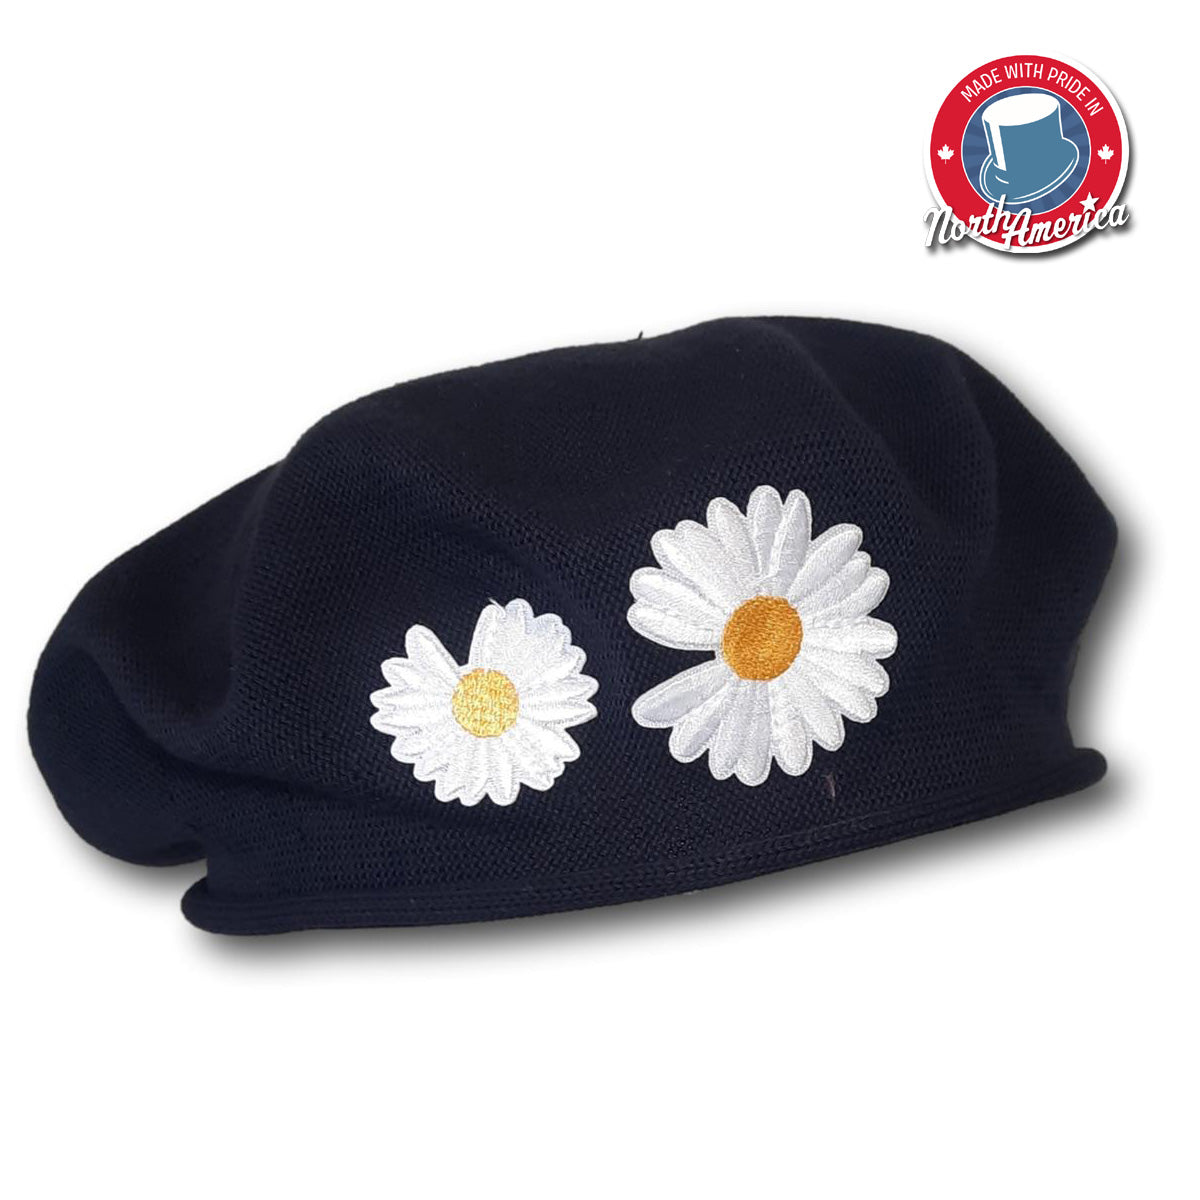 Embroidered Daisy Beret